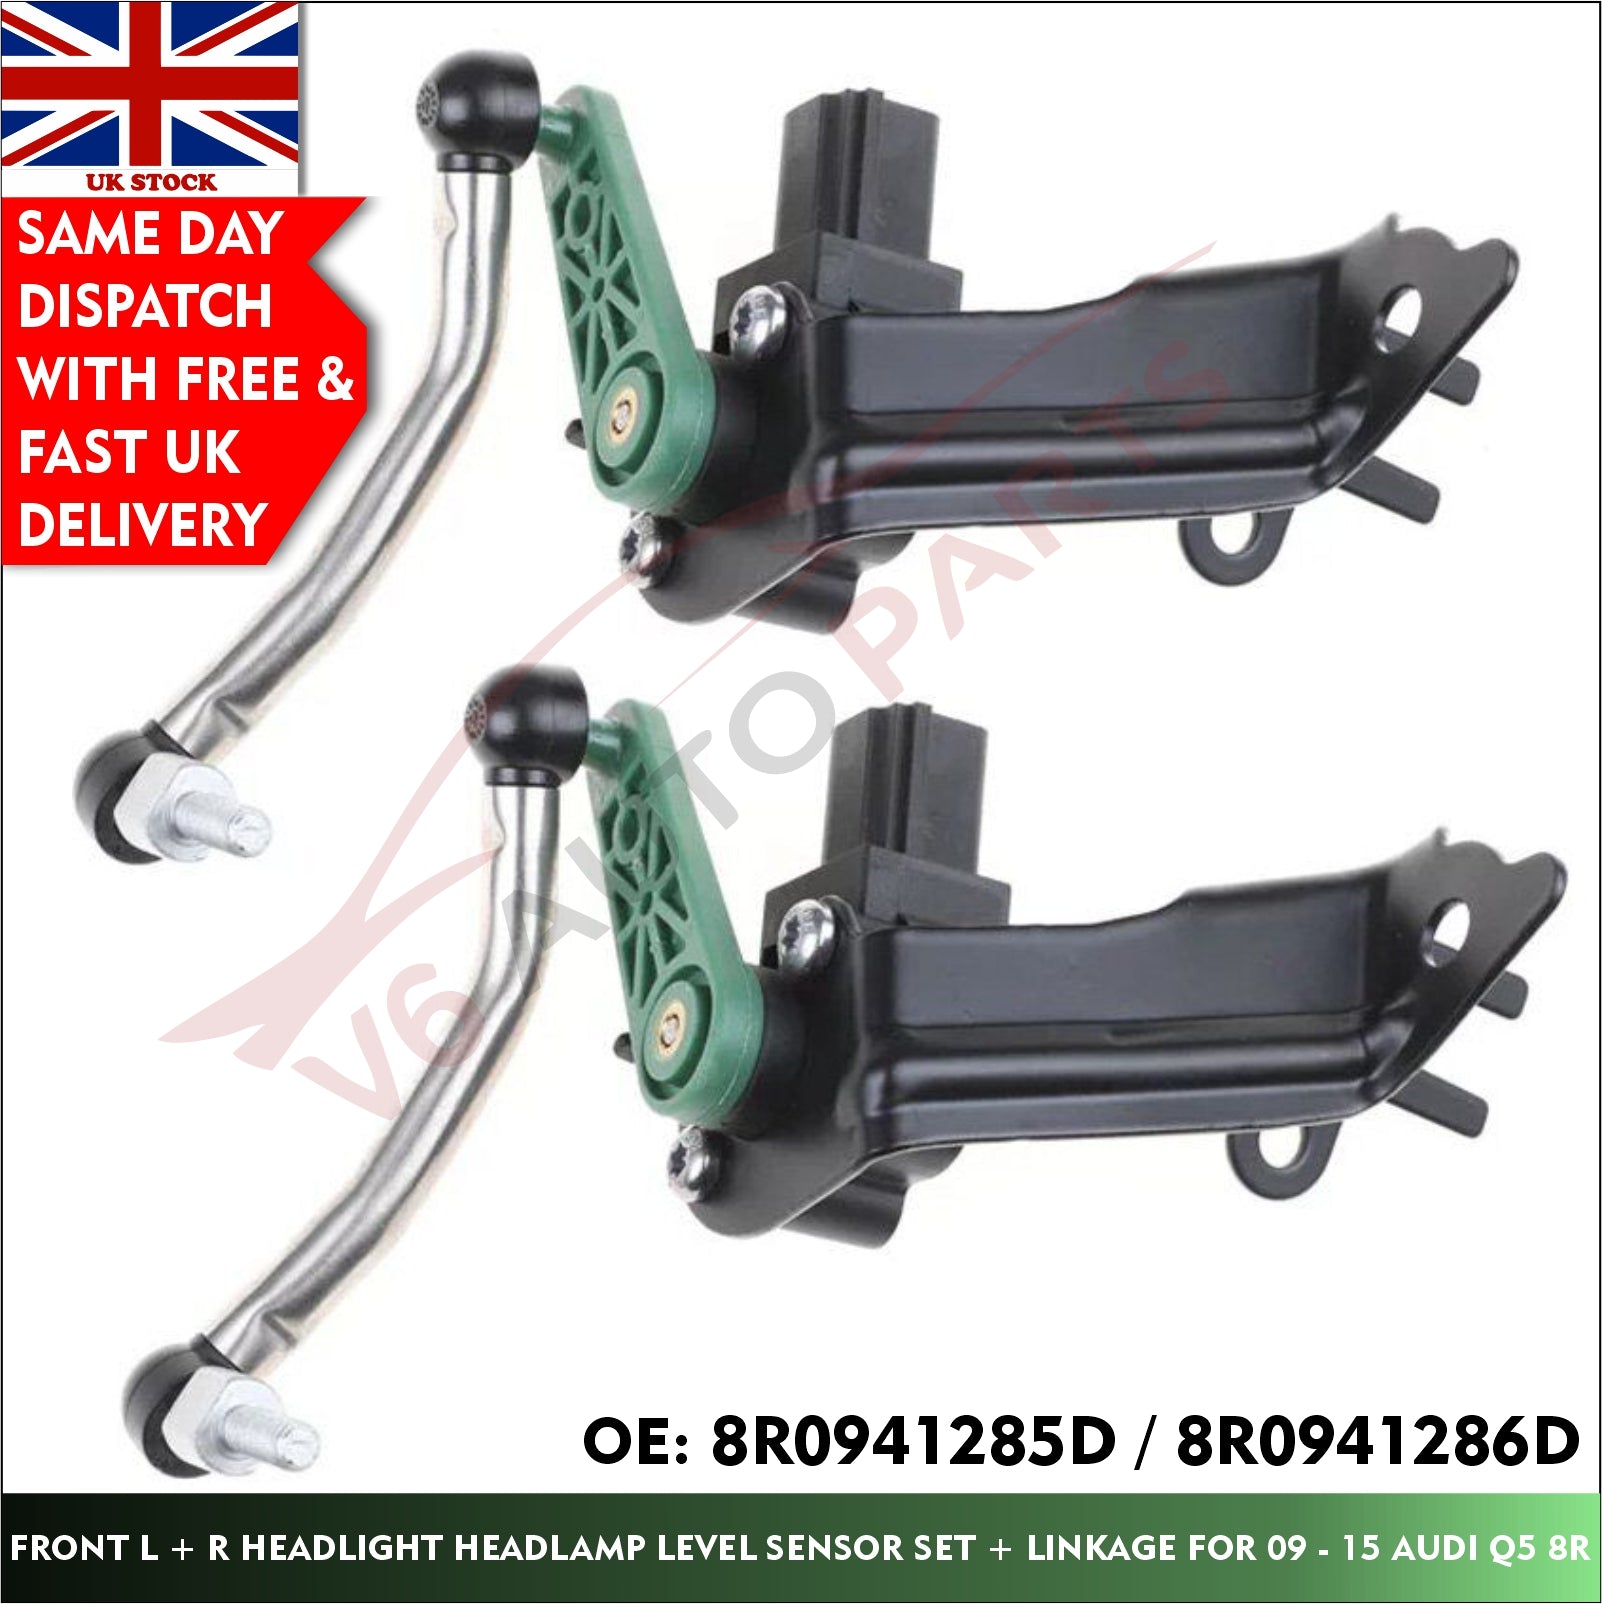 8R0941285D&8R0941286D Air Suspension Ride Height Level Sensor Front Left Right For 09 - 15 AUDI Q5 8RB